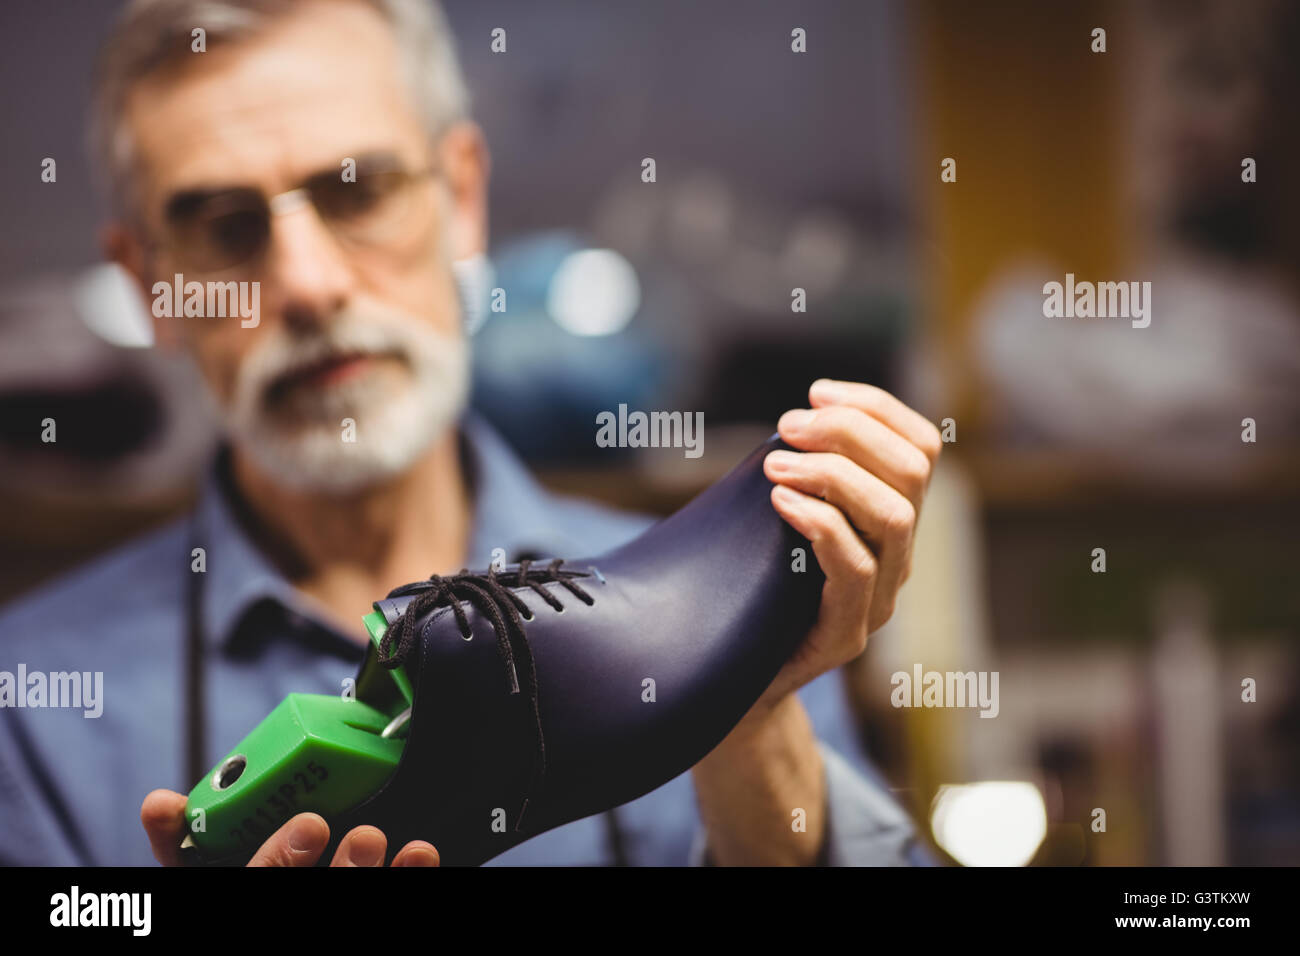 Focus on foreground of a shoe Stock Photo